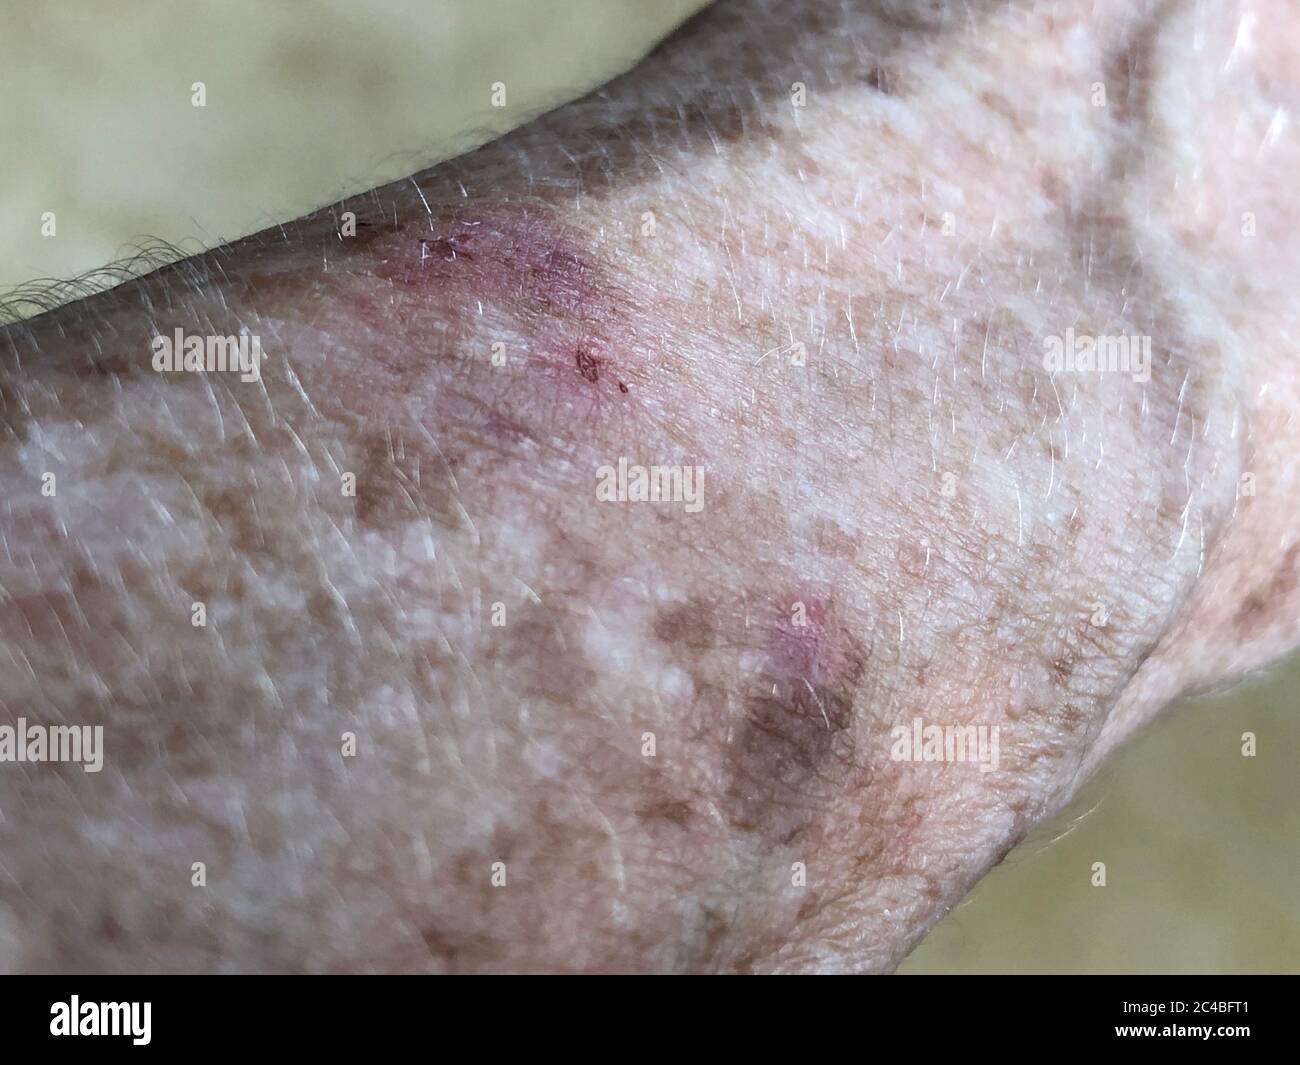 Age spots on the forearm of a 72-year-old woman. Stock Photo